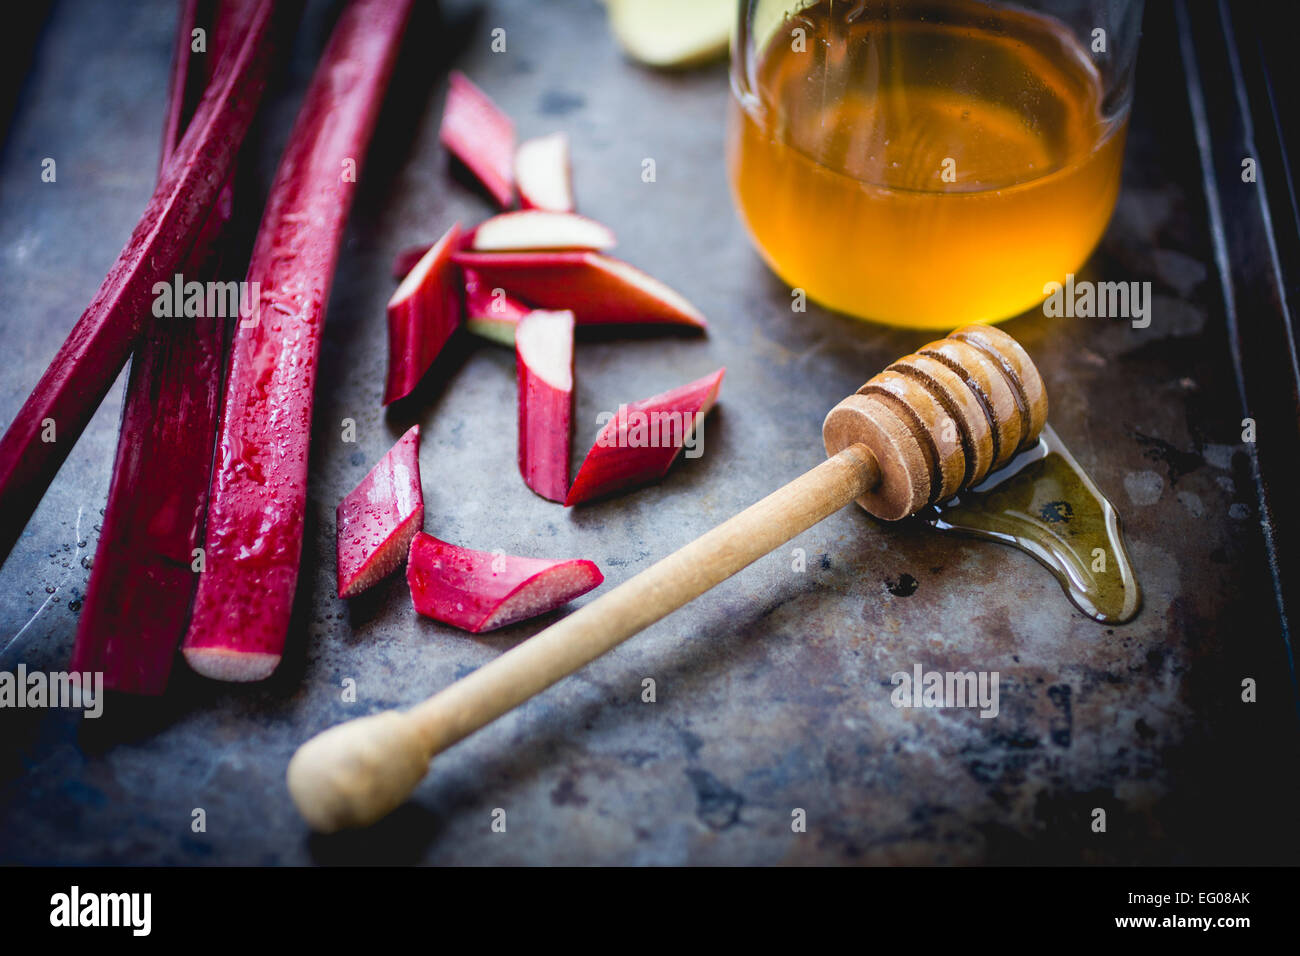 Rhubarb and honey cooking ingredients Stock Photo